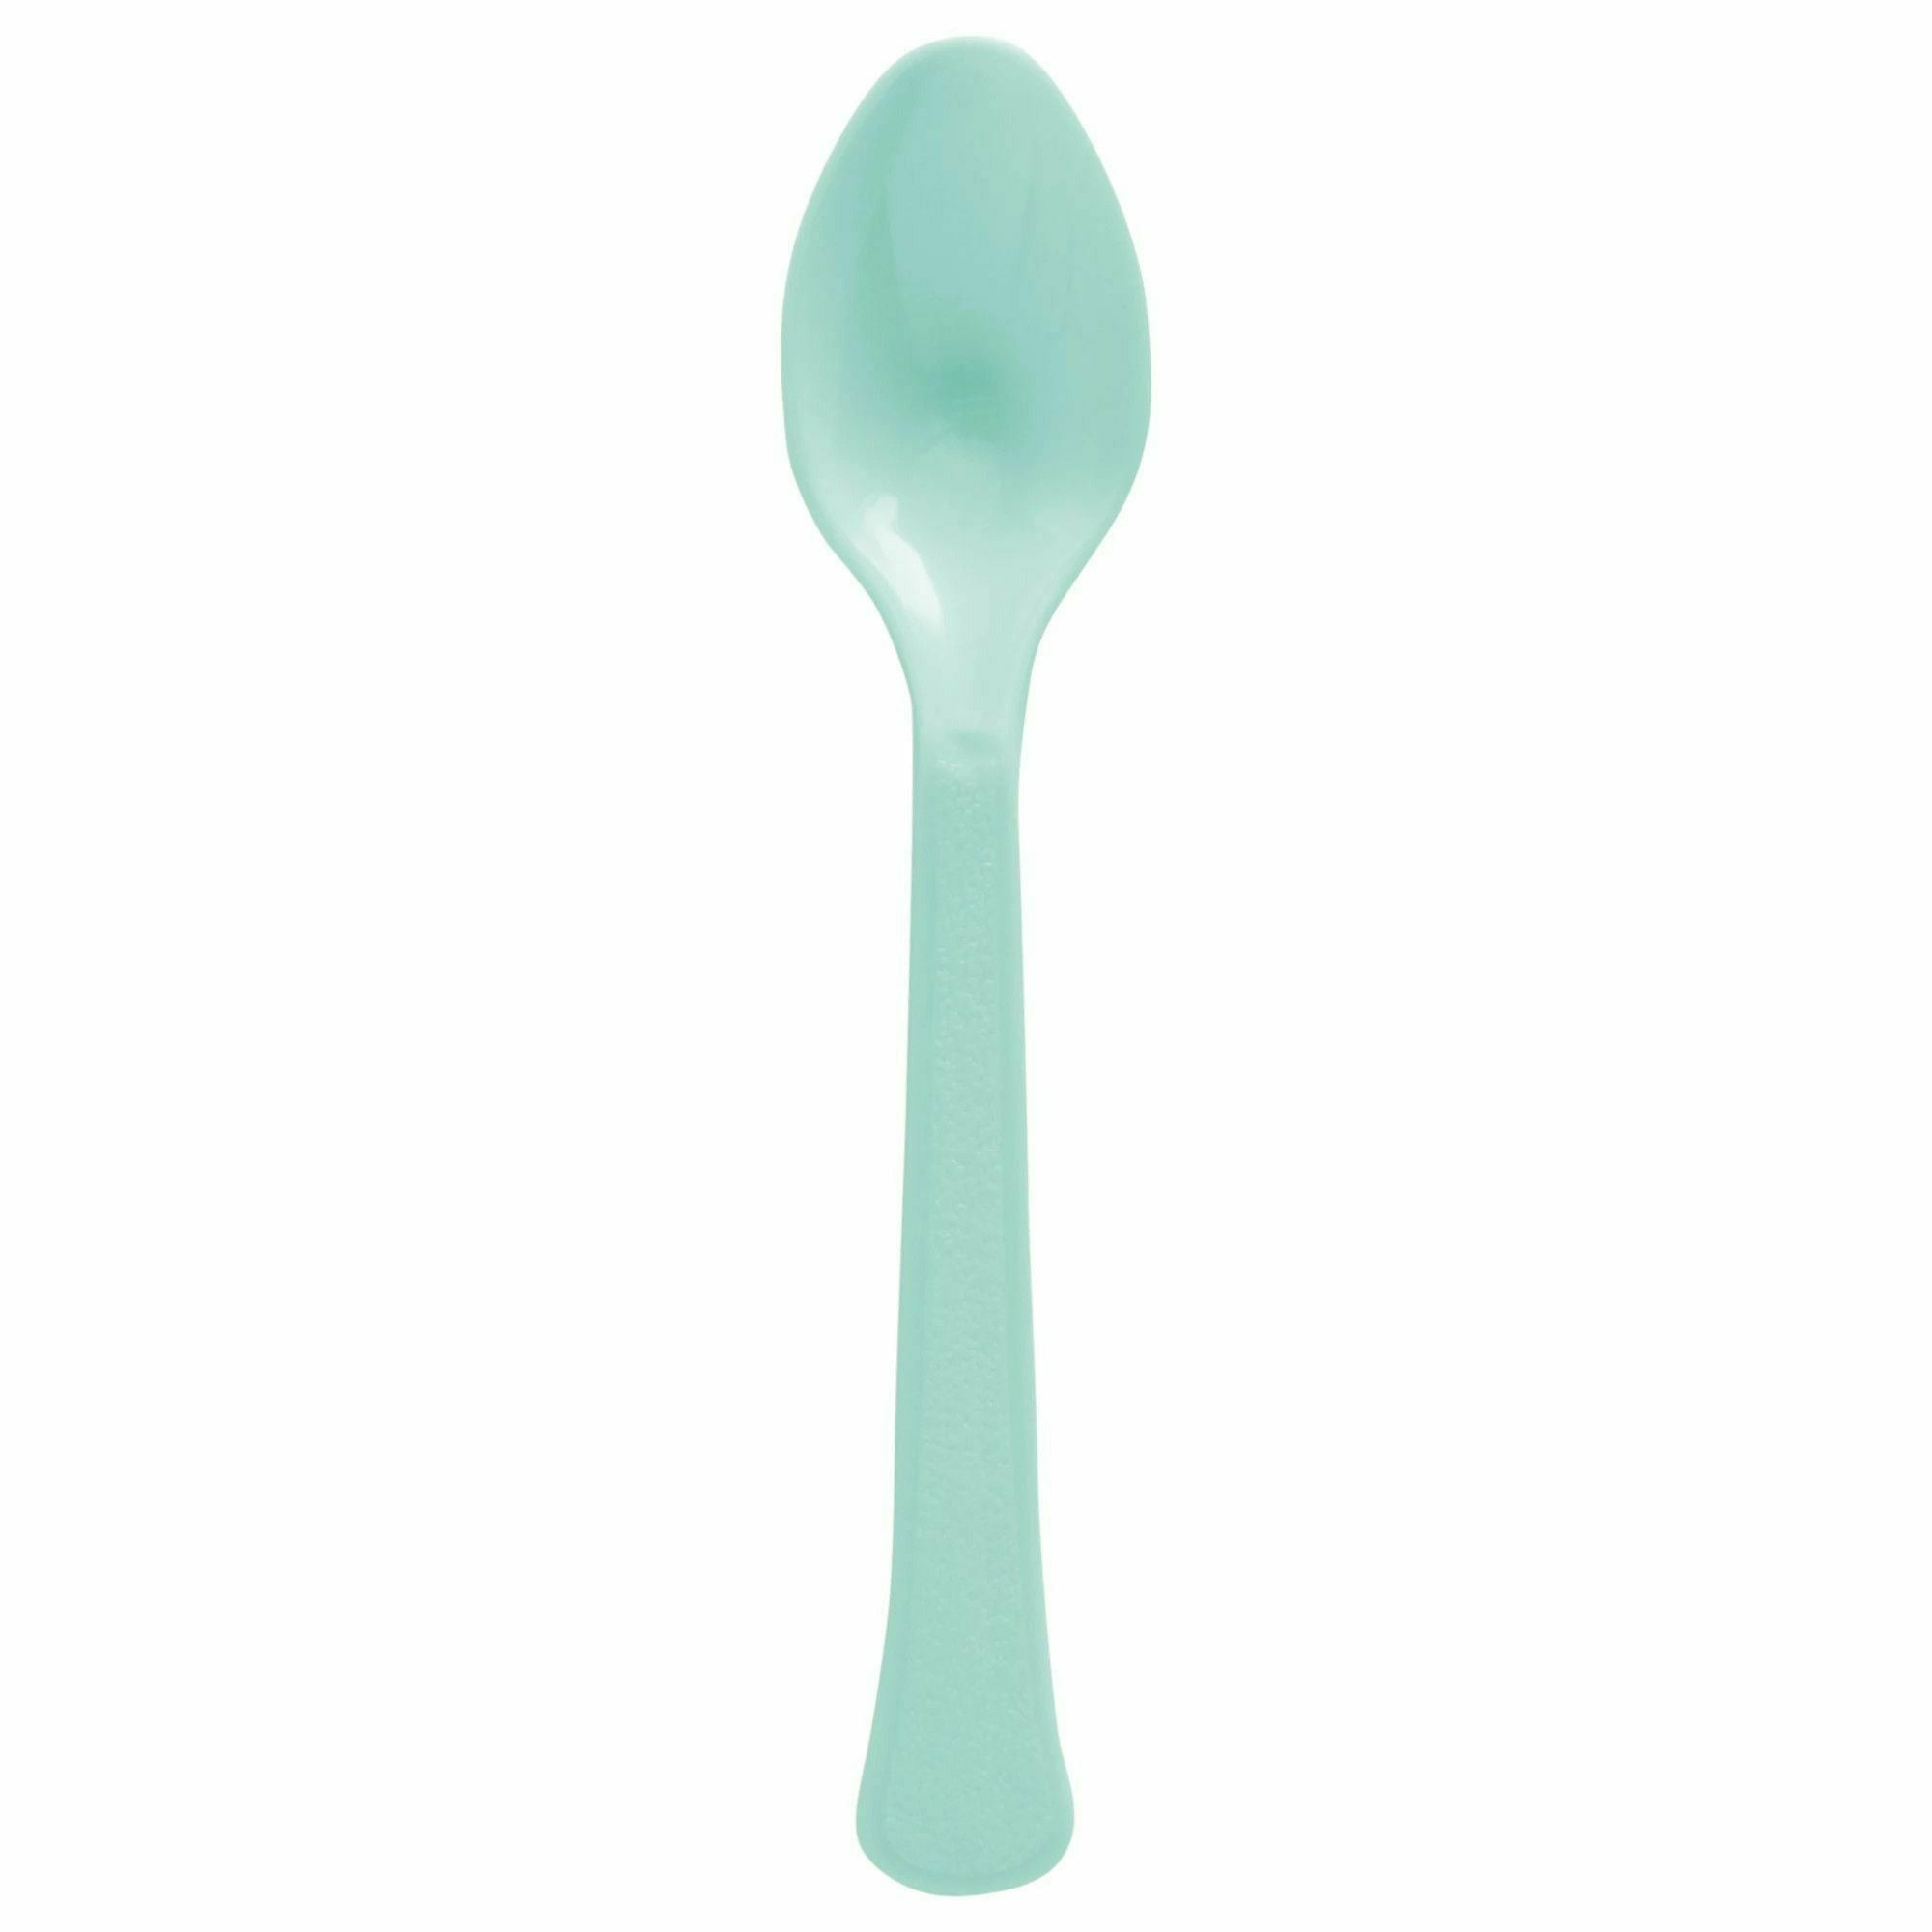 Amscan BASIC Robin's Egg Blue - Boxed, Heavy Weight Spoons, 20 Ct.